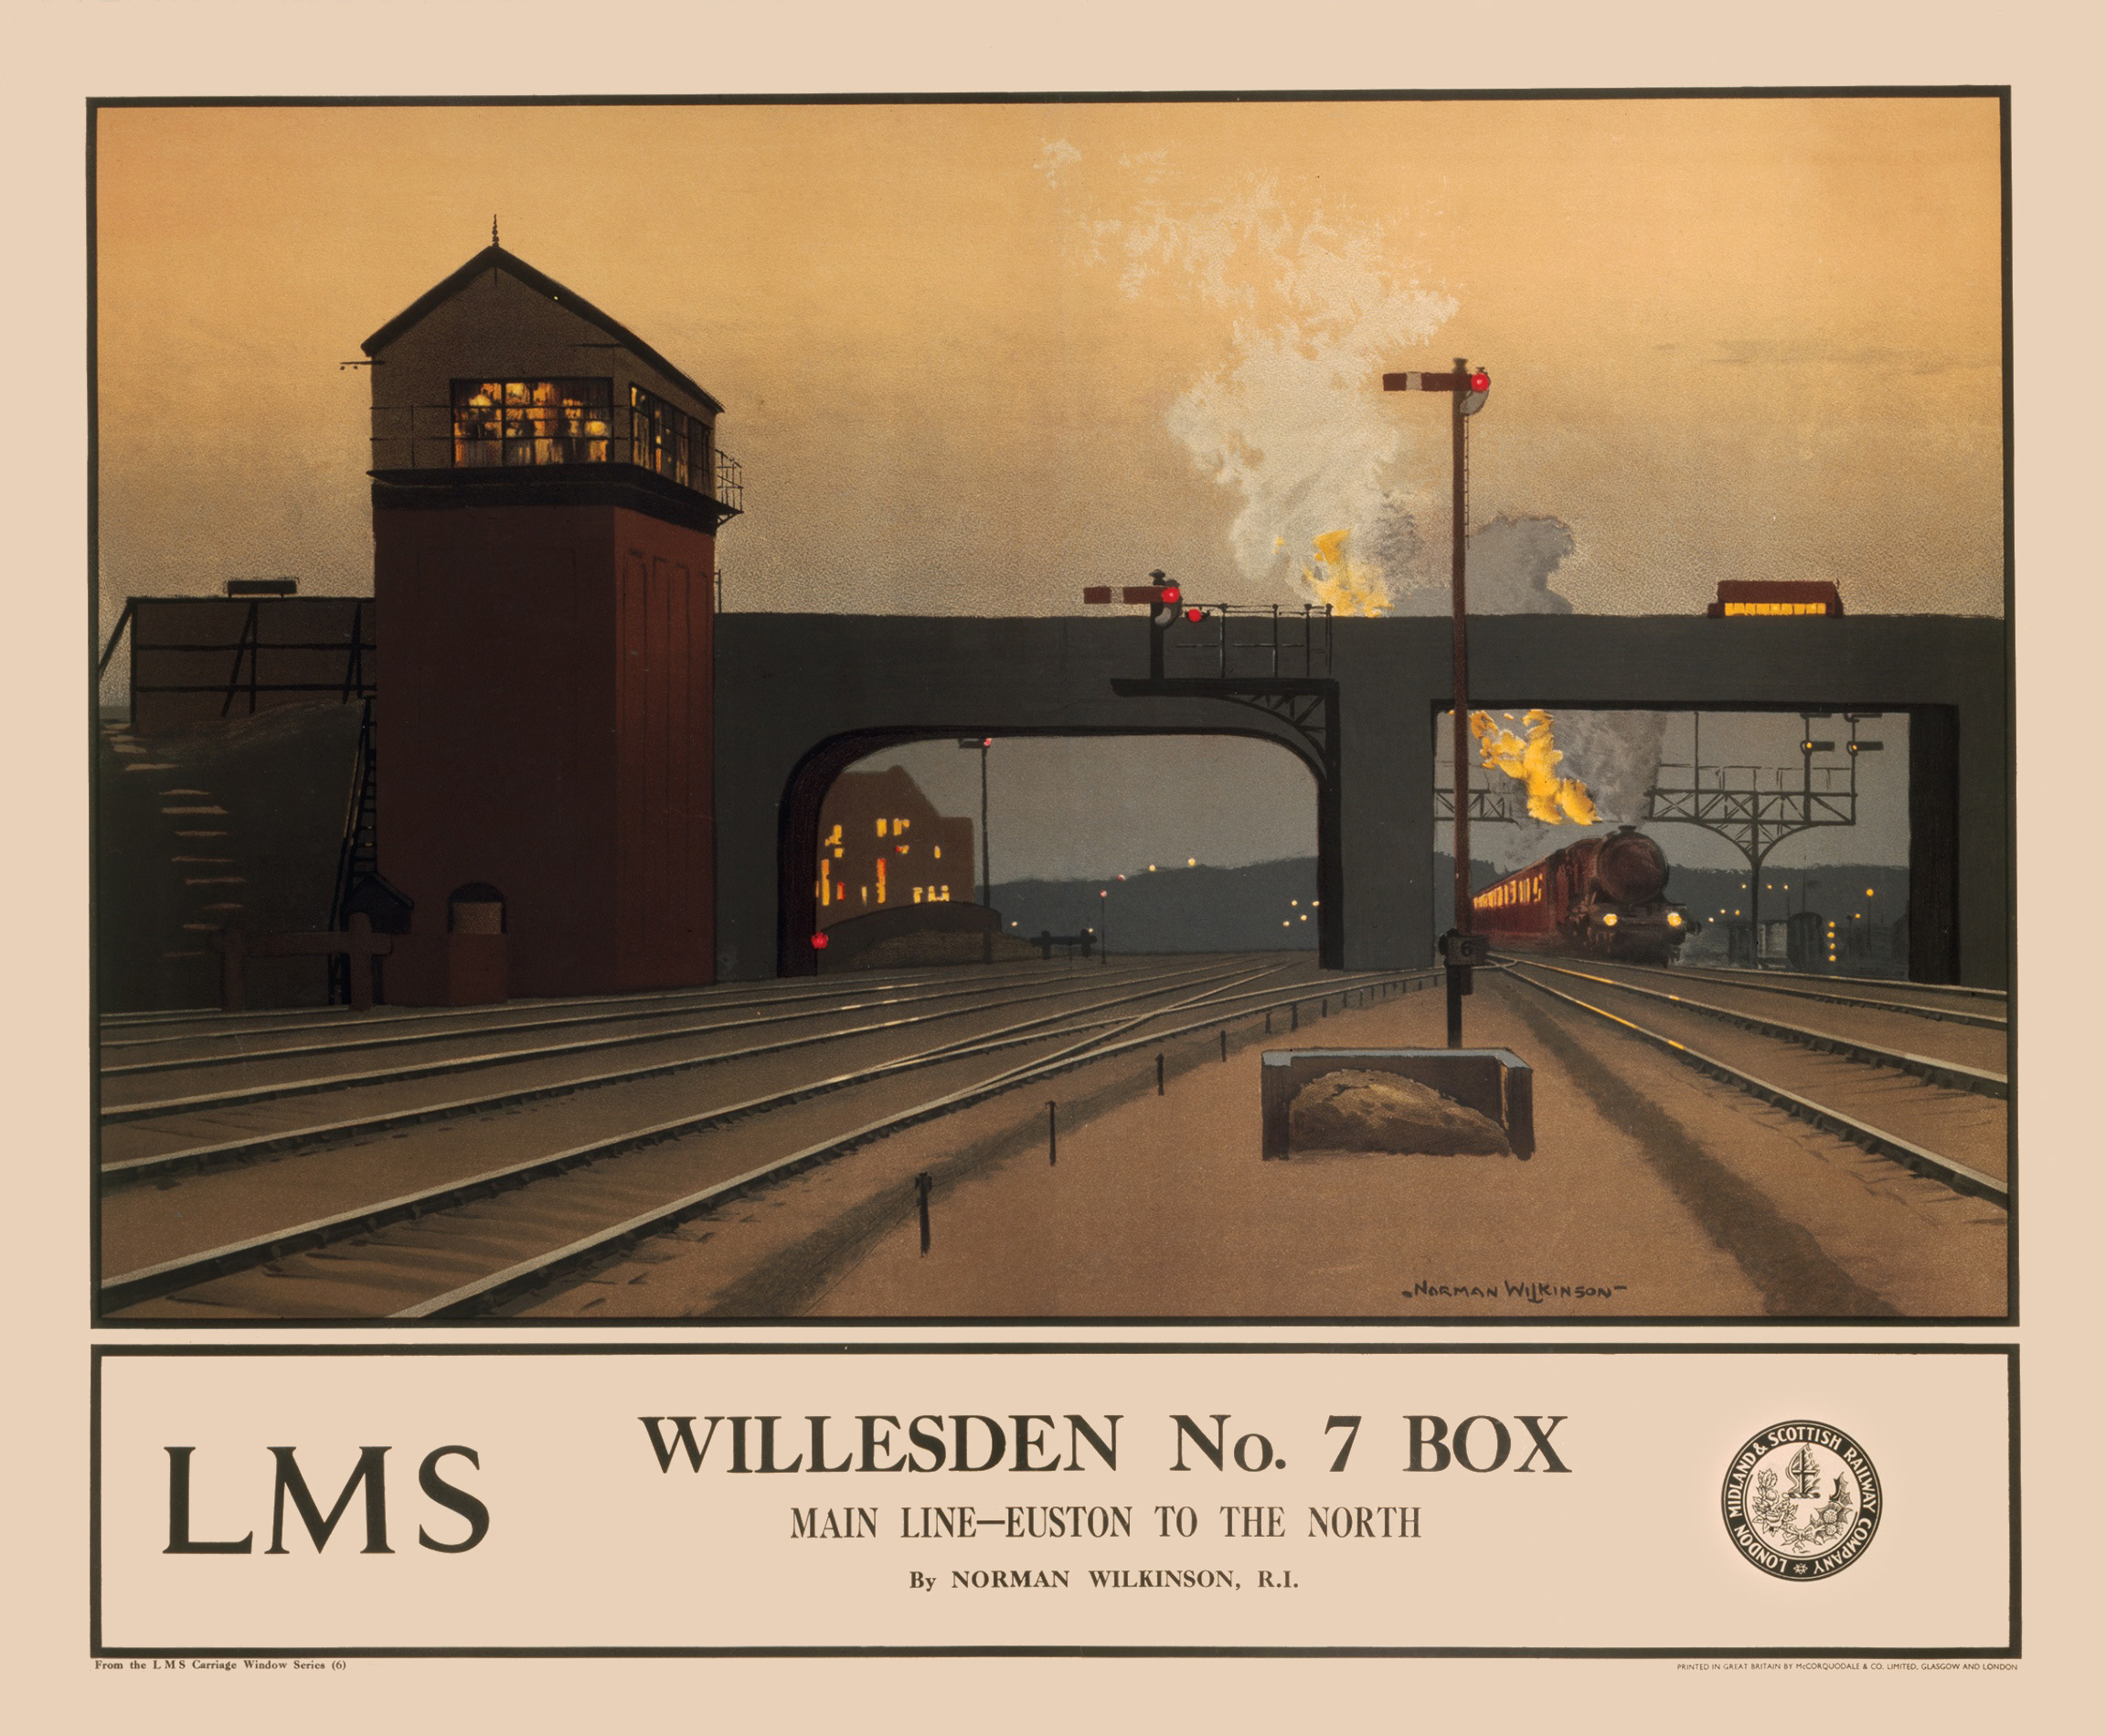 Poster produced for the London Midland & Scottish Railway (LMS). Artwork by Norman Wilkinson. A famous marine painter, Wilkinson made a major contribution to the art of camouflage. He designed posters for the London & North Western Railway, LMS and Southern Railway, and organised the Royal Academy series of posters for the LMS in 1924. He also worked for the Illustrated London News and Illustrated Mail. "